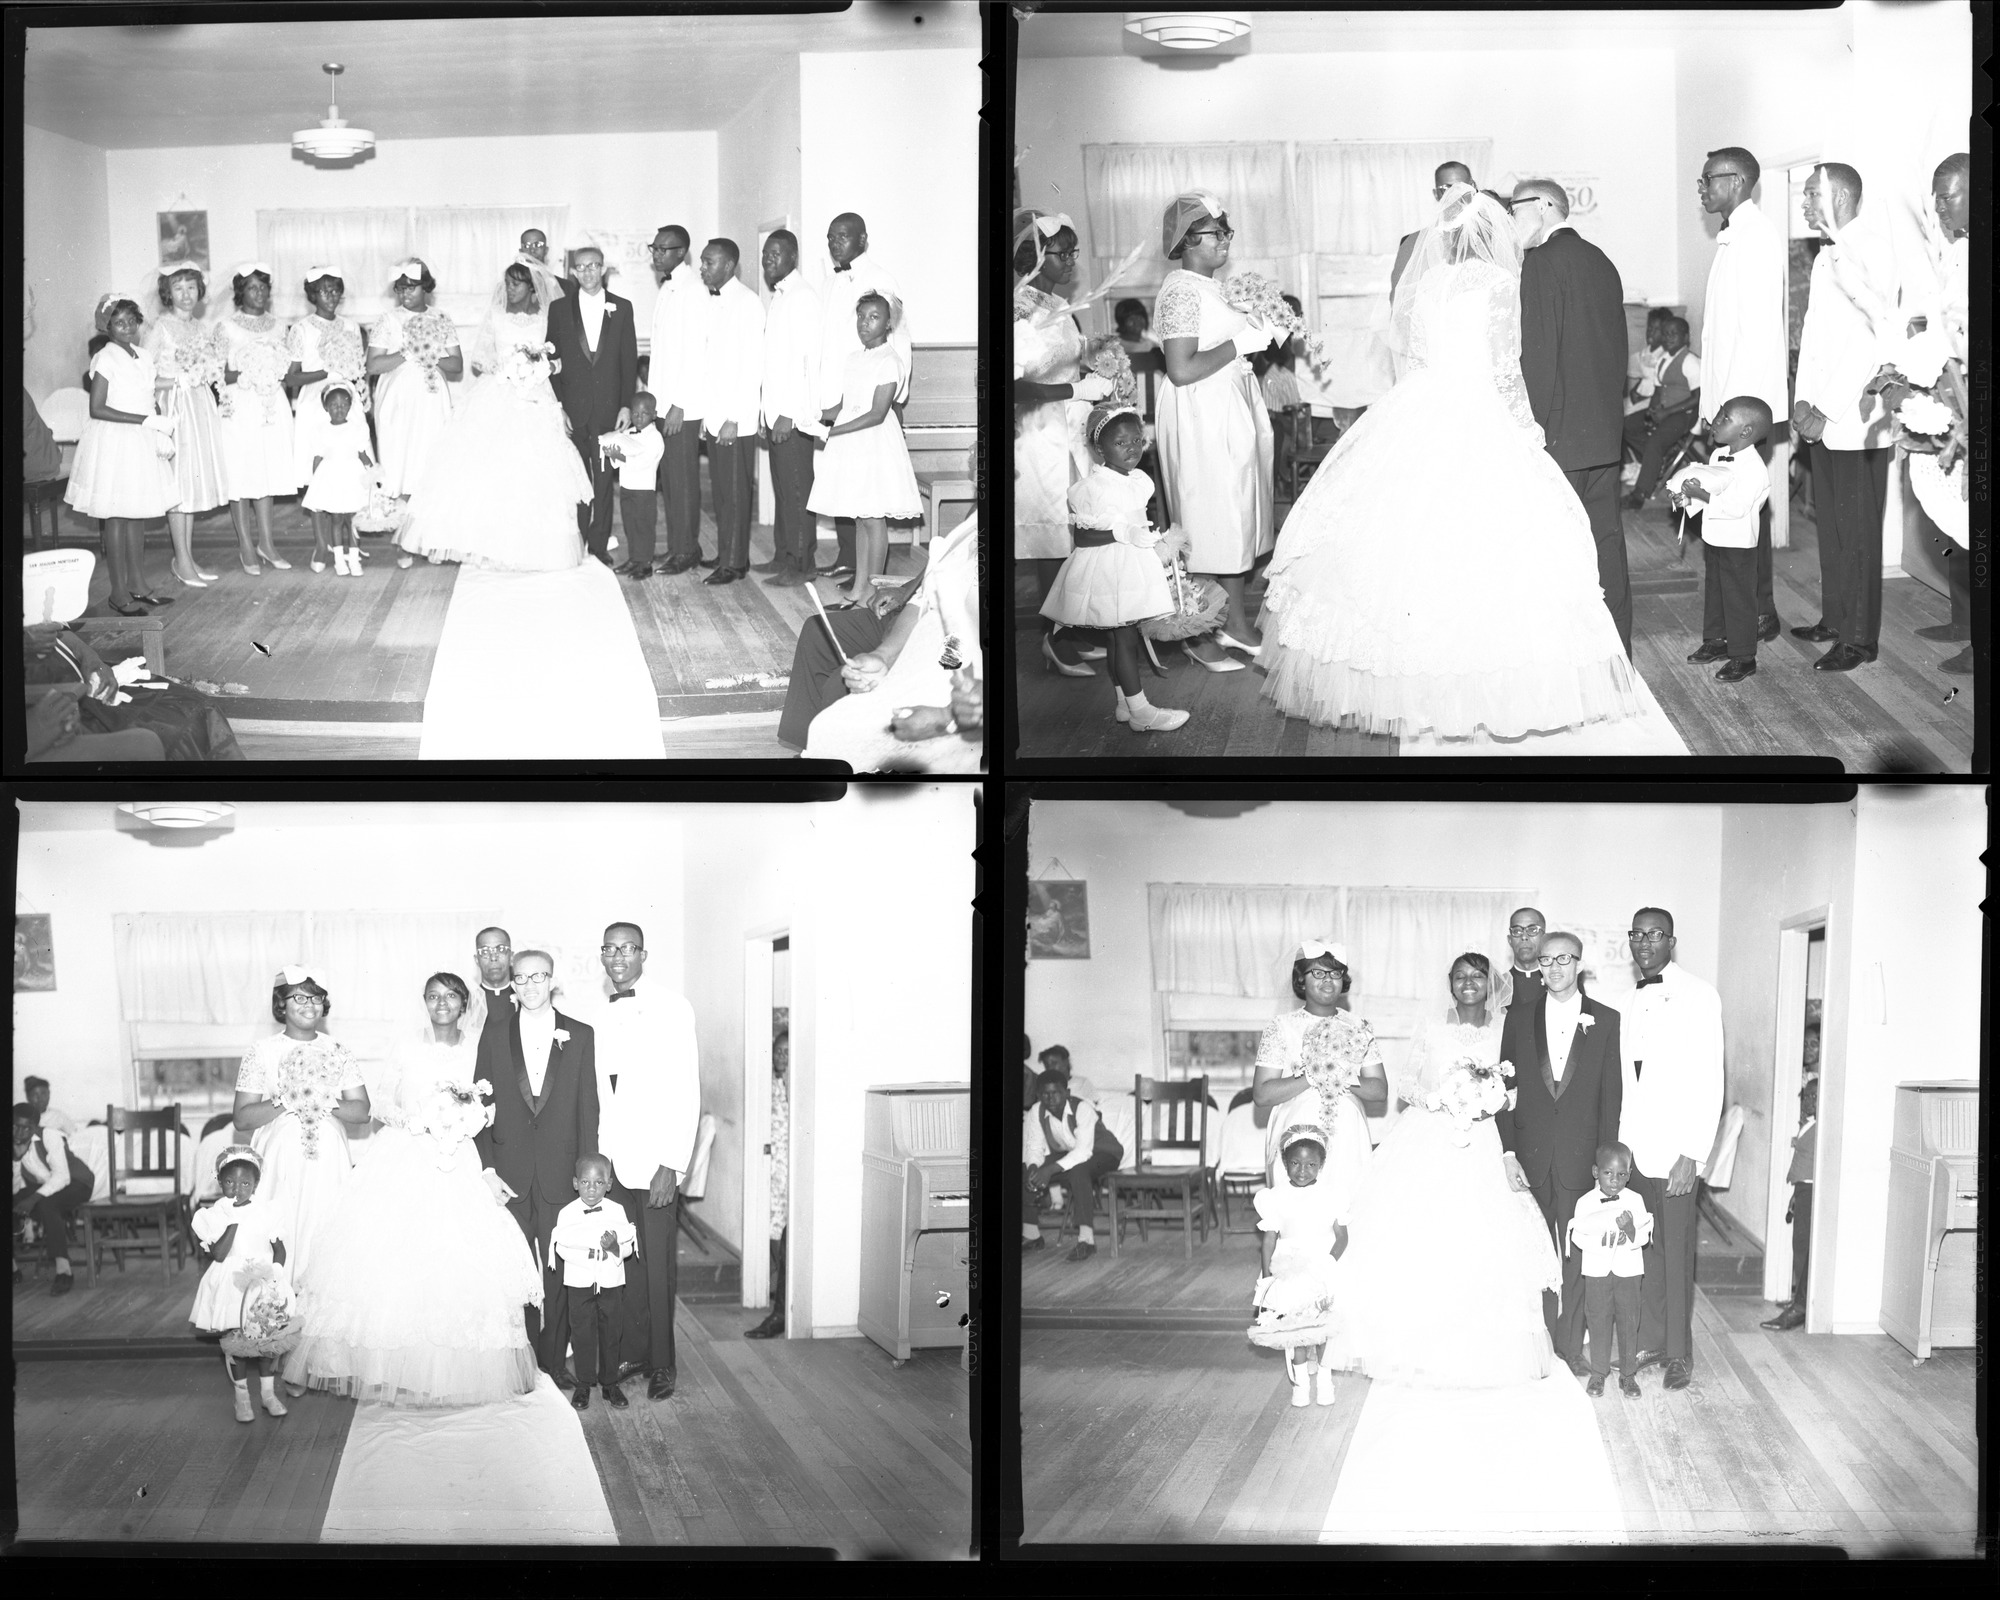 Set of negatives by Clinton Wright of Calton's wedding, August 15, 1965, page 1